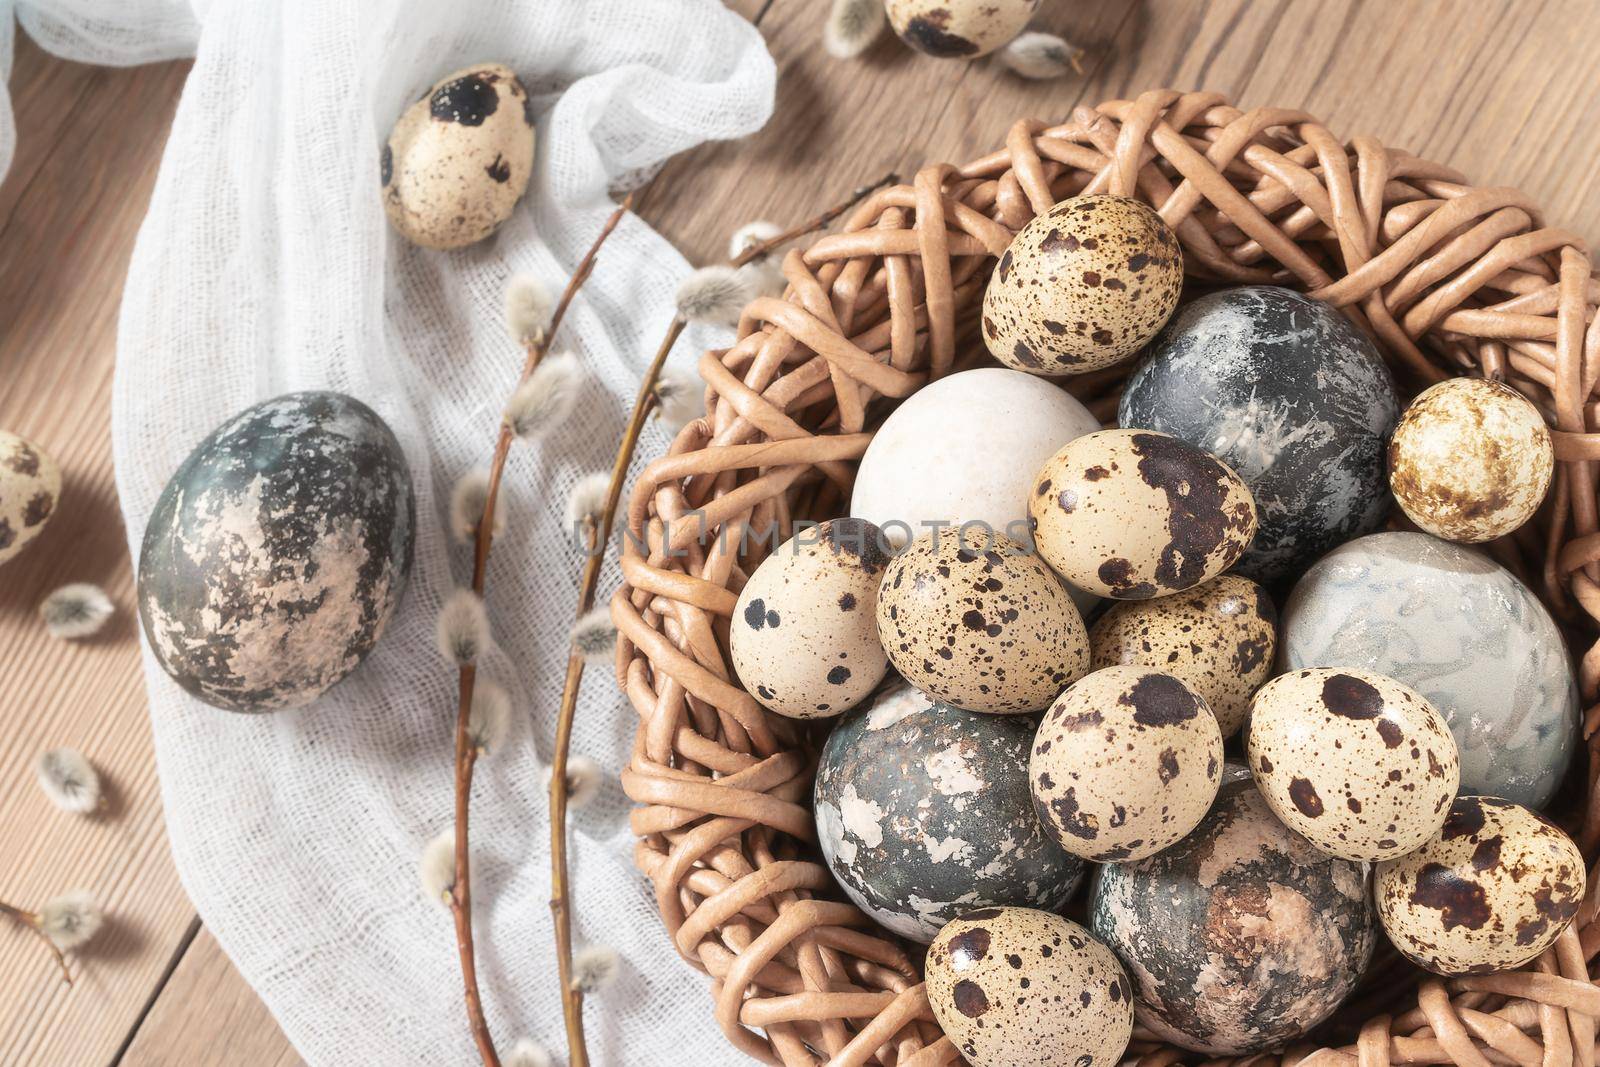 Easter composition - Easter eggs painted with natural dyes in a wicker nest on a wooden table.